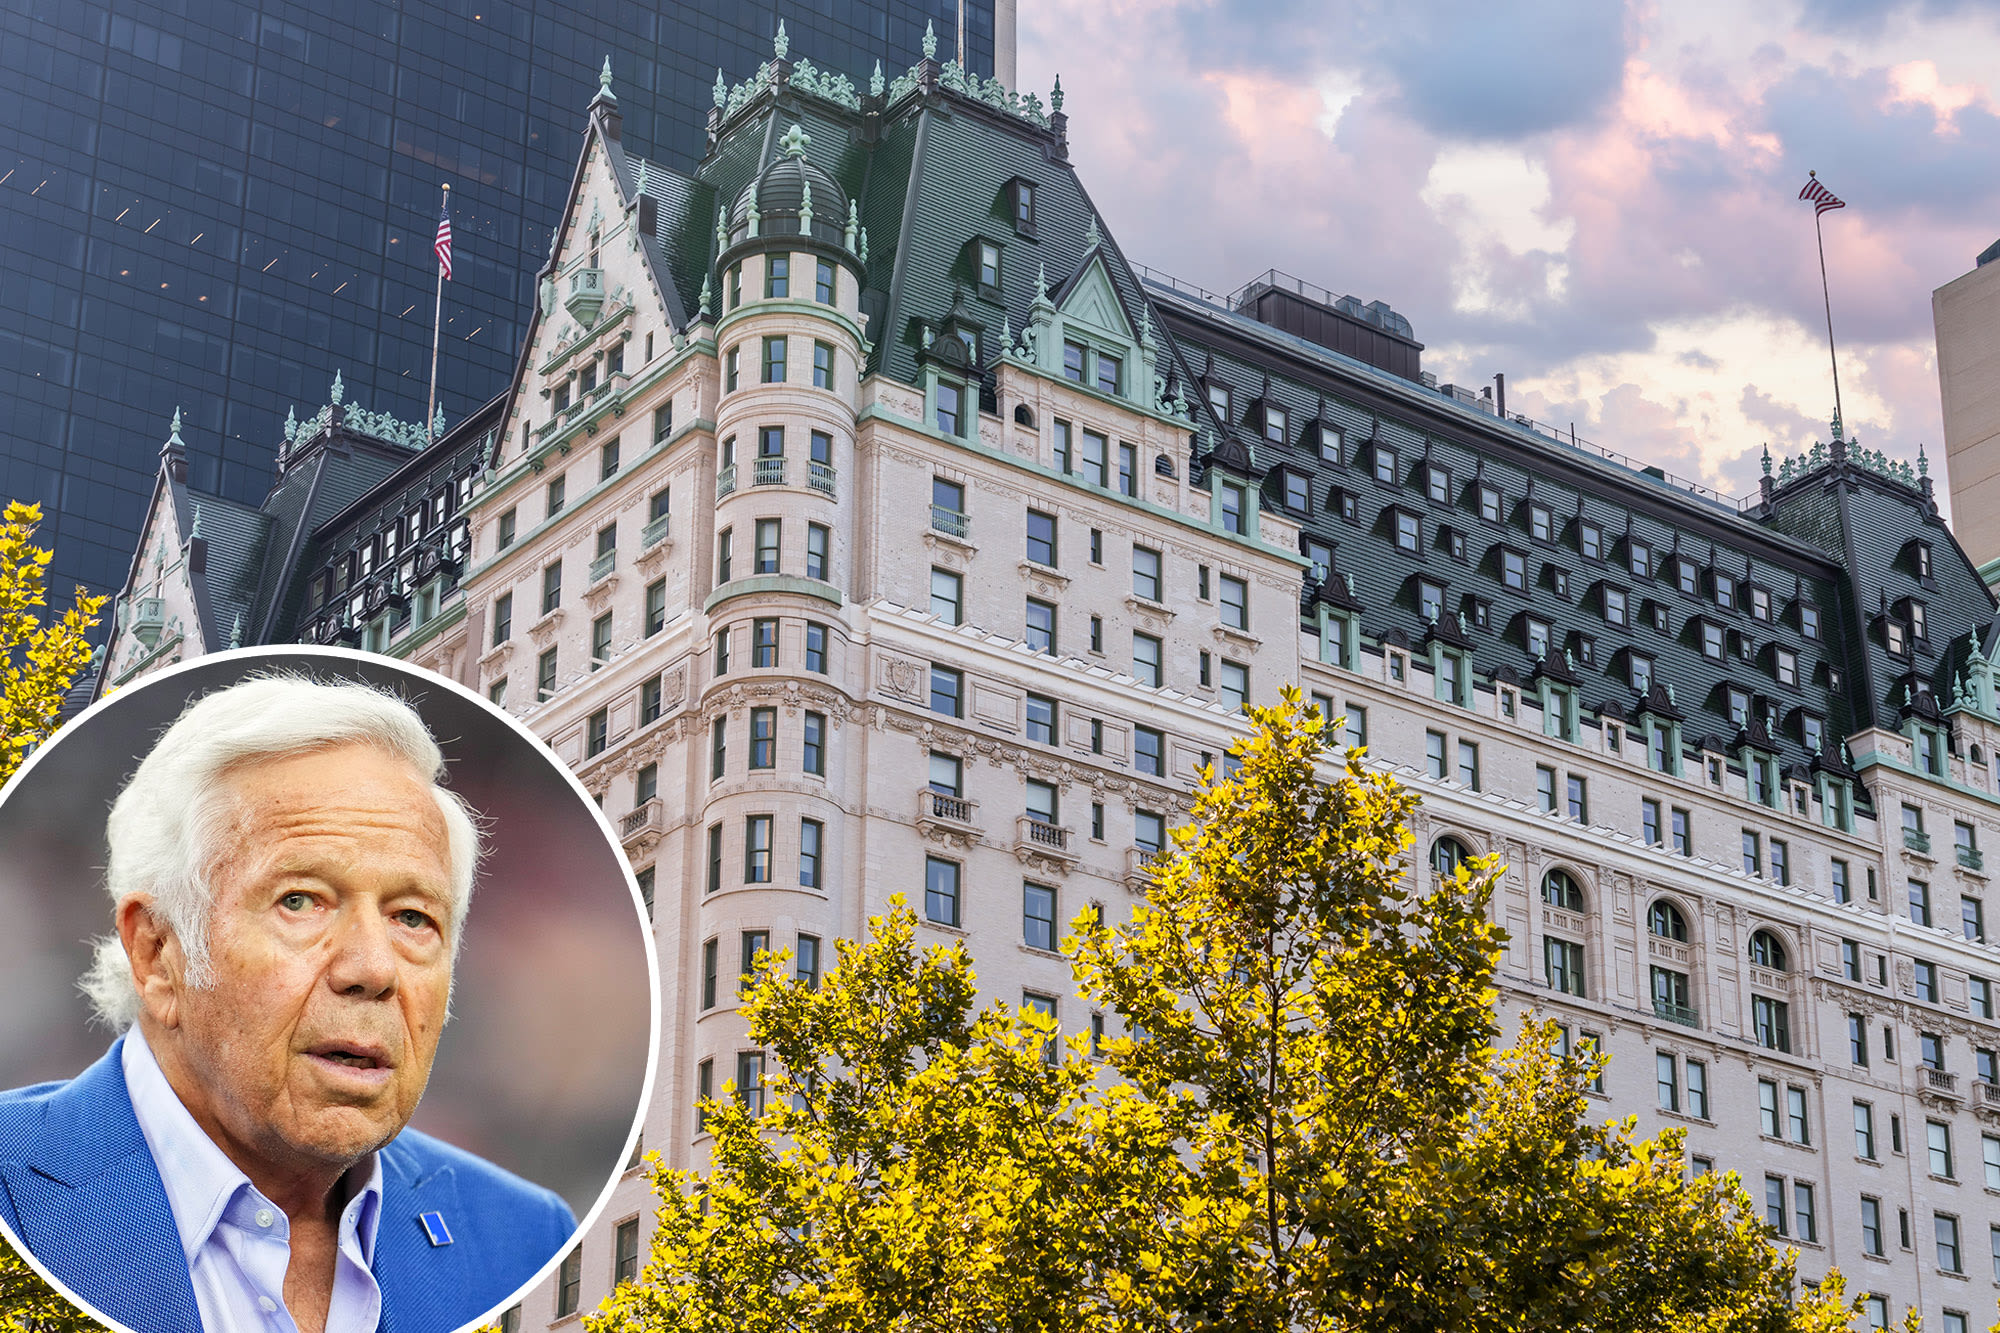 Patriots owner Robert Kraft sells apartment in NYC’s iconic Plaza Hotel for $22.5M